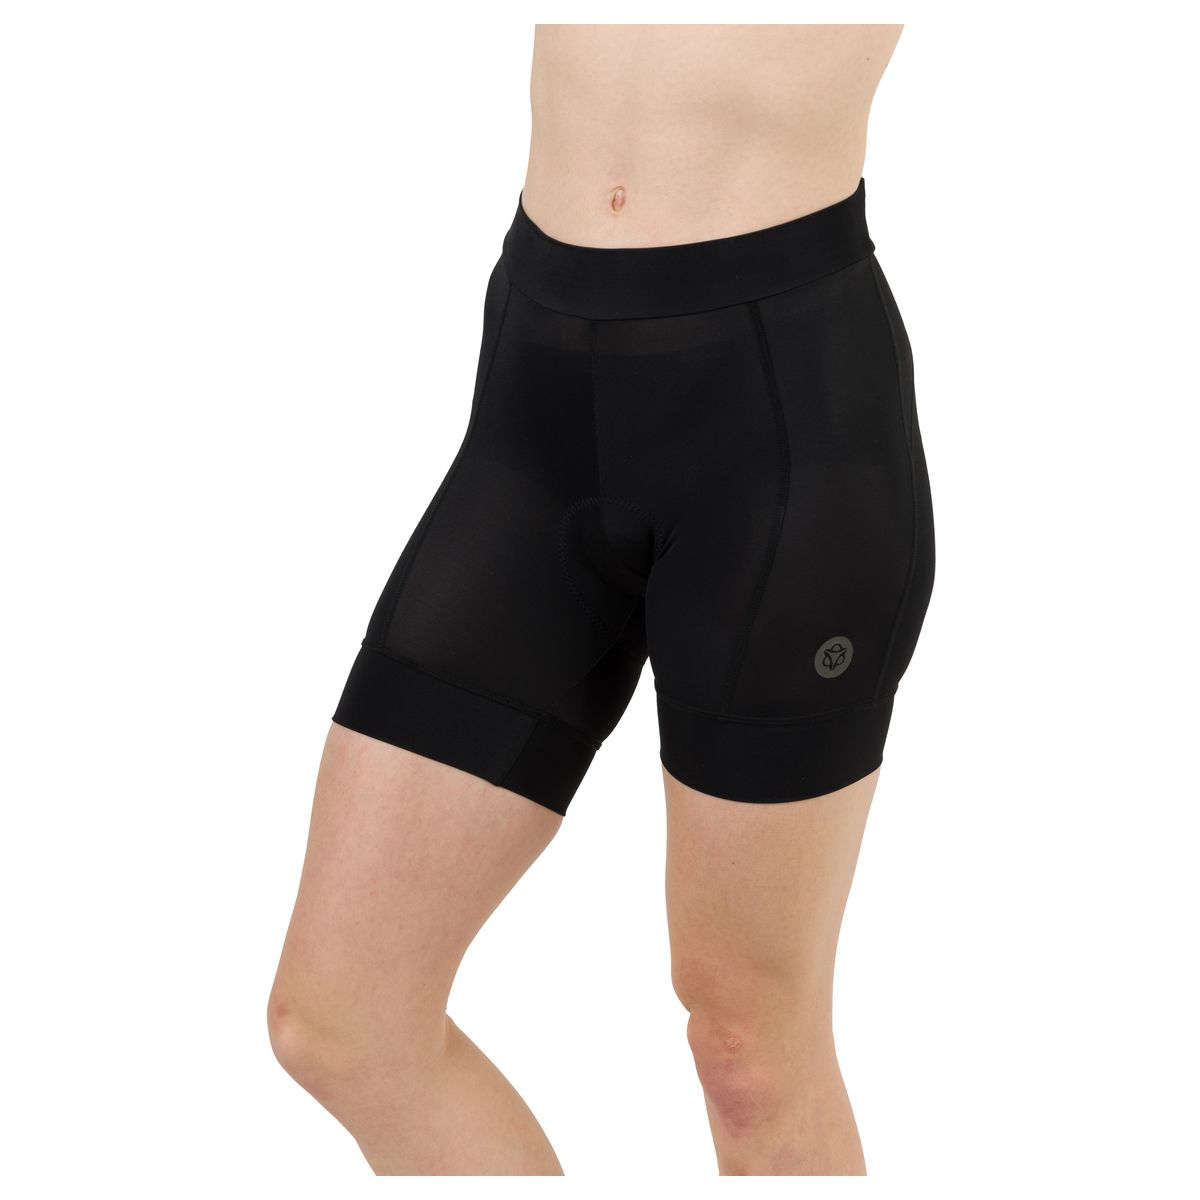 Shorty II Essential Femme fit example